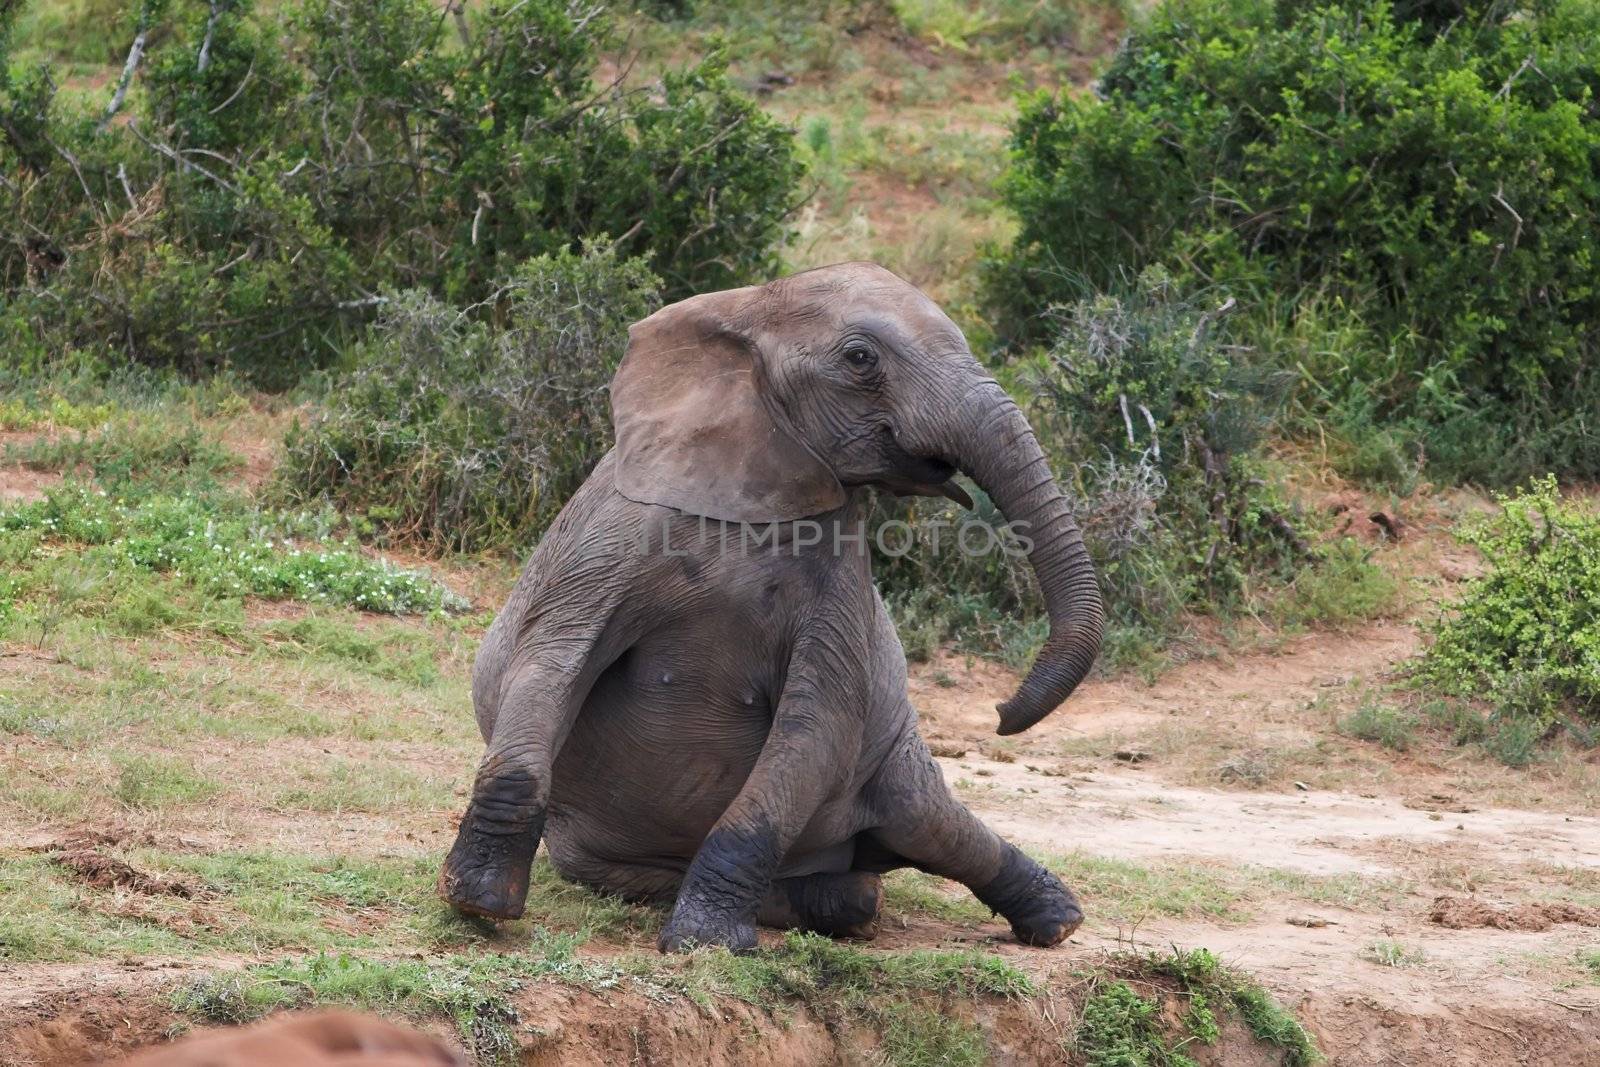 African Elephant getting up after a rest